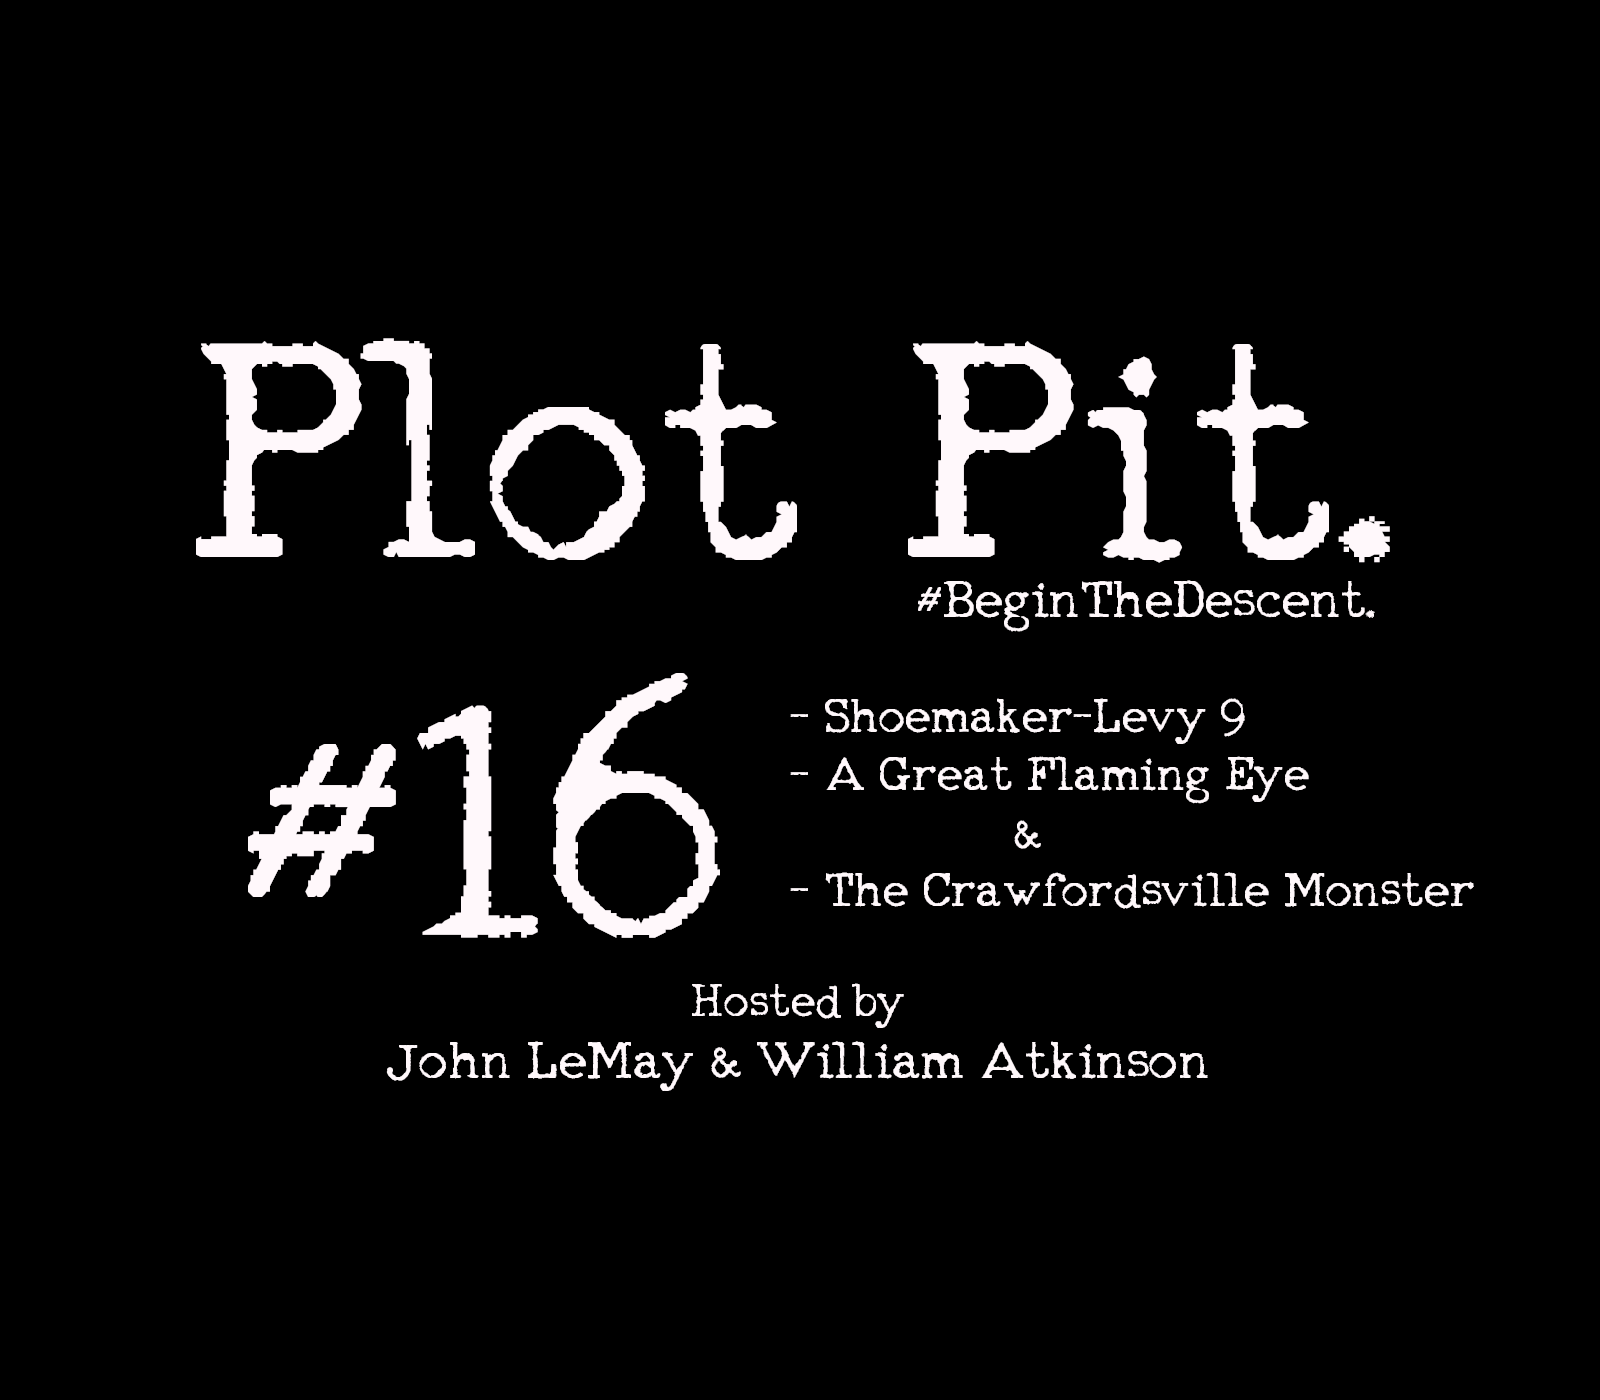 Shoemaker-Levy 9, A Great Flaming Eye, & The Crawfordsville Monster